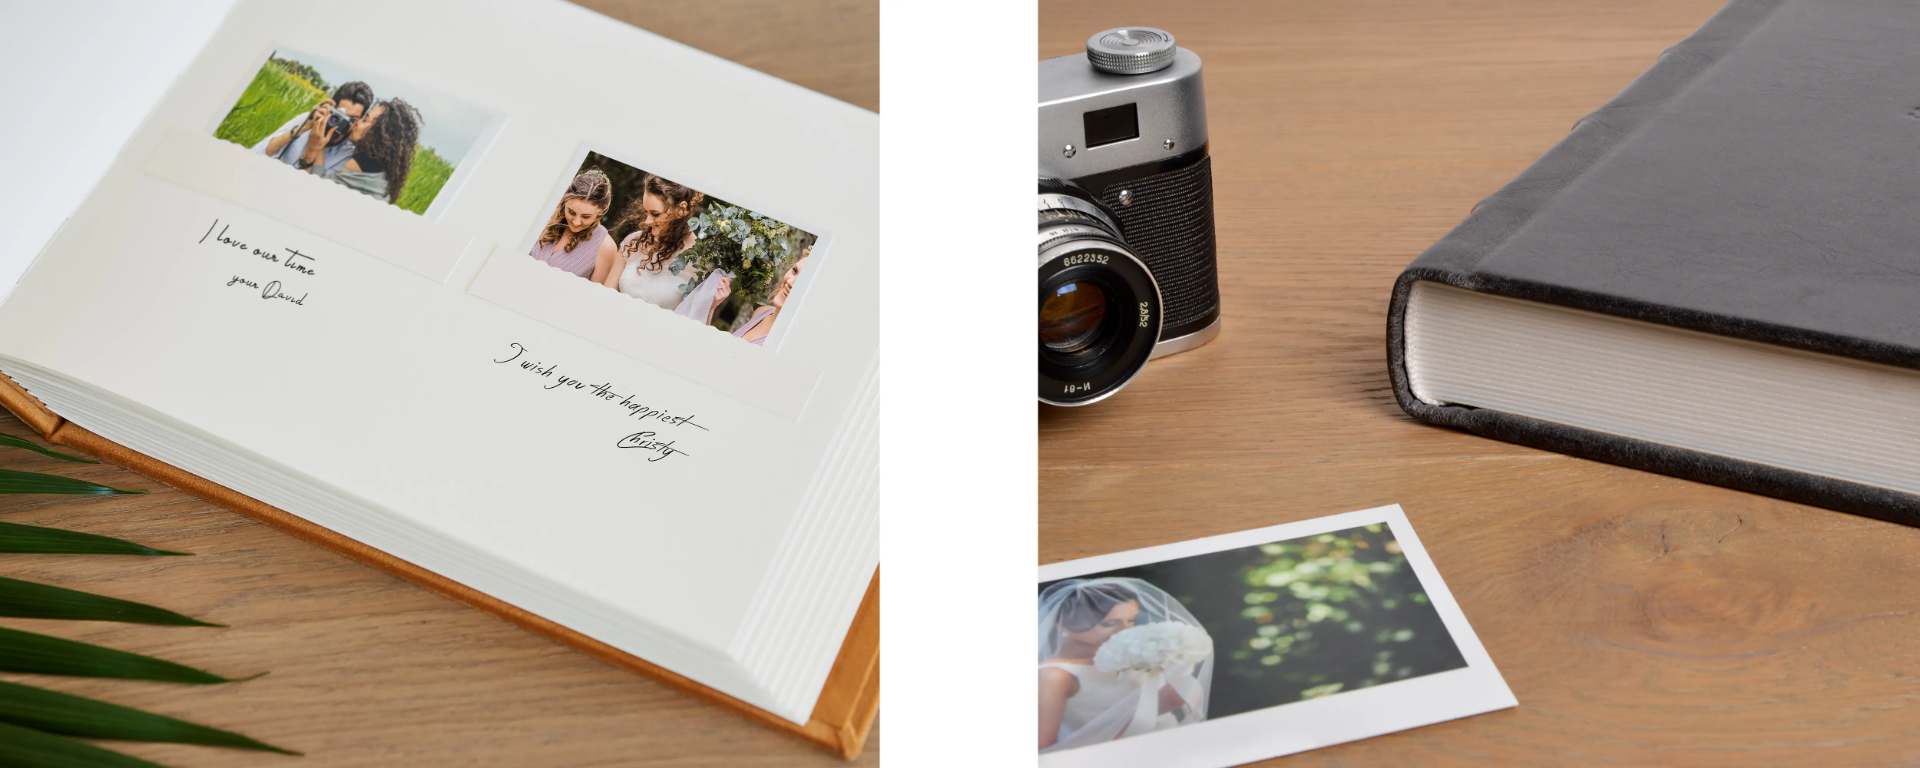 3 Wedding Photo Albums With Sleeves for up to 3000 4x6 Photos, Large Velvet  Slip in Gift Books Slipcase Hand Made in Europe by Arcoalbum 